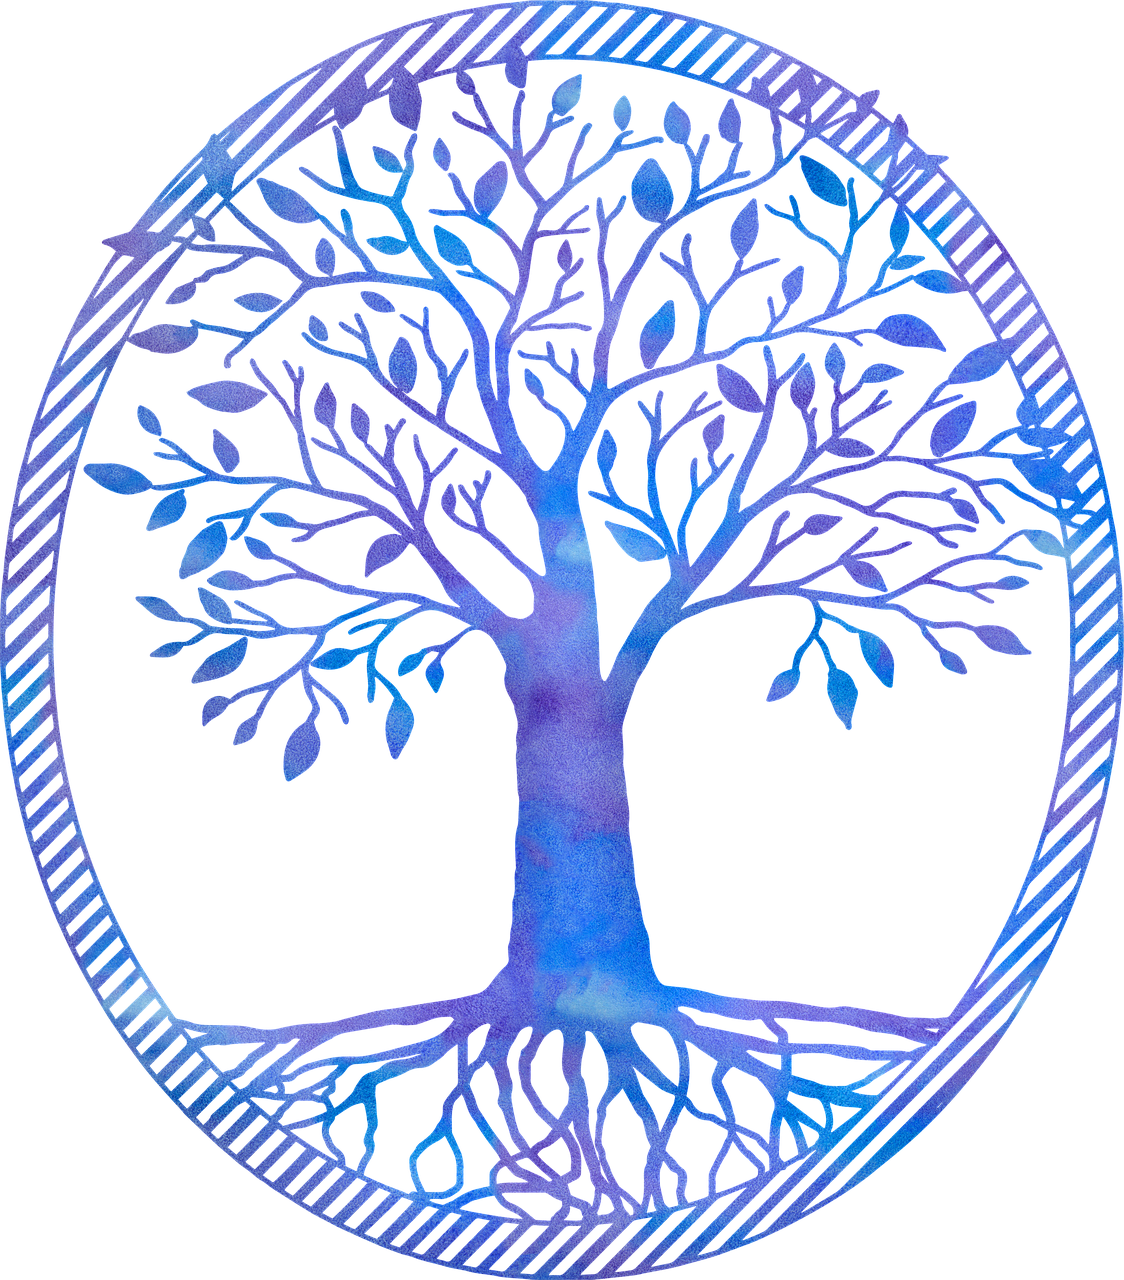 a watercolor drawing of a tree in a circle, a digital rendering, sots art, black and blue and purple scheme, tradition, intricat, logo without text